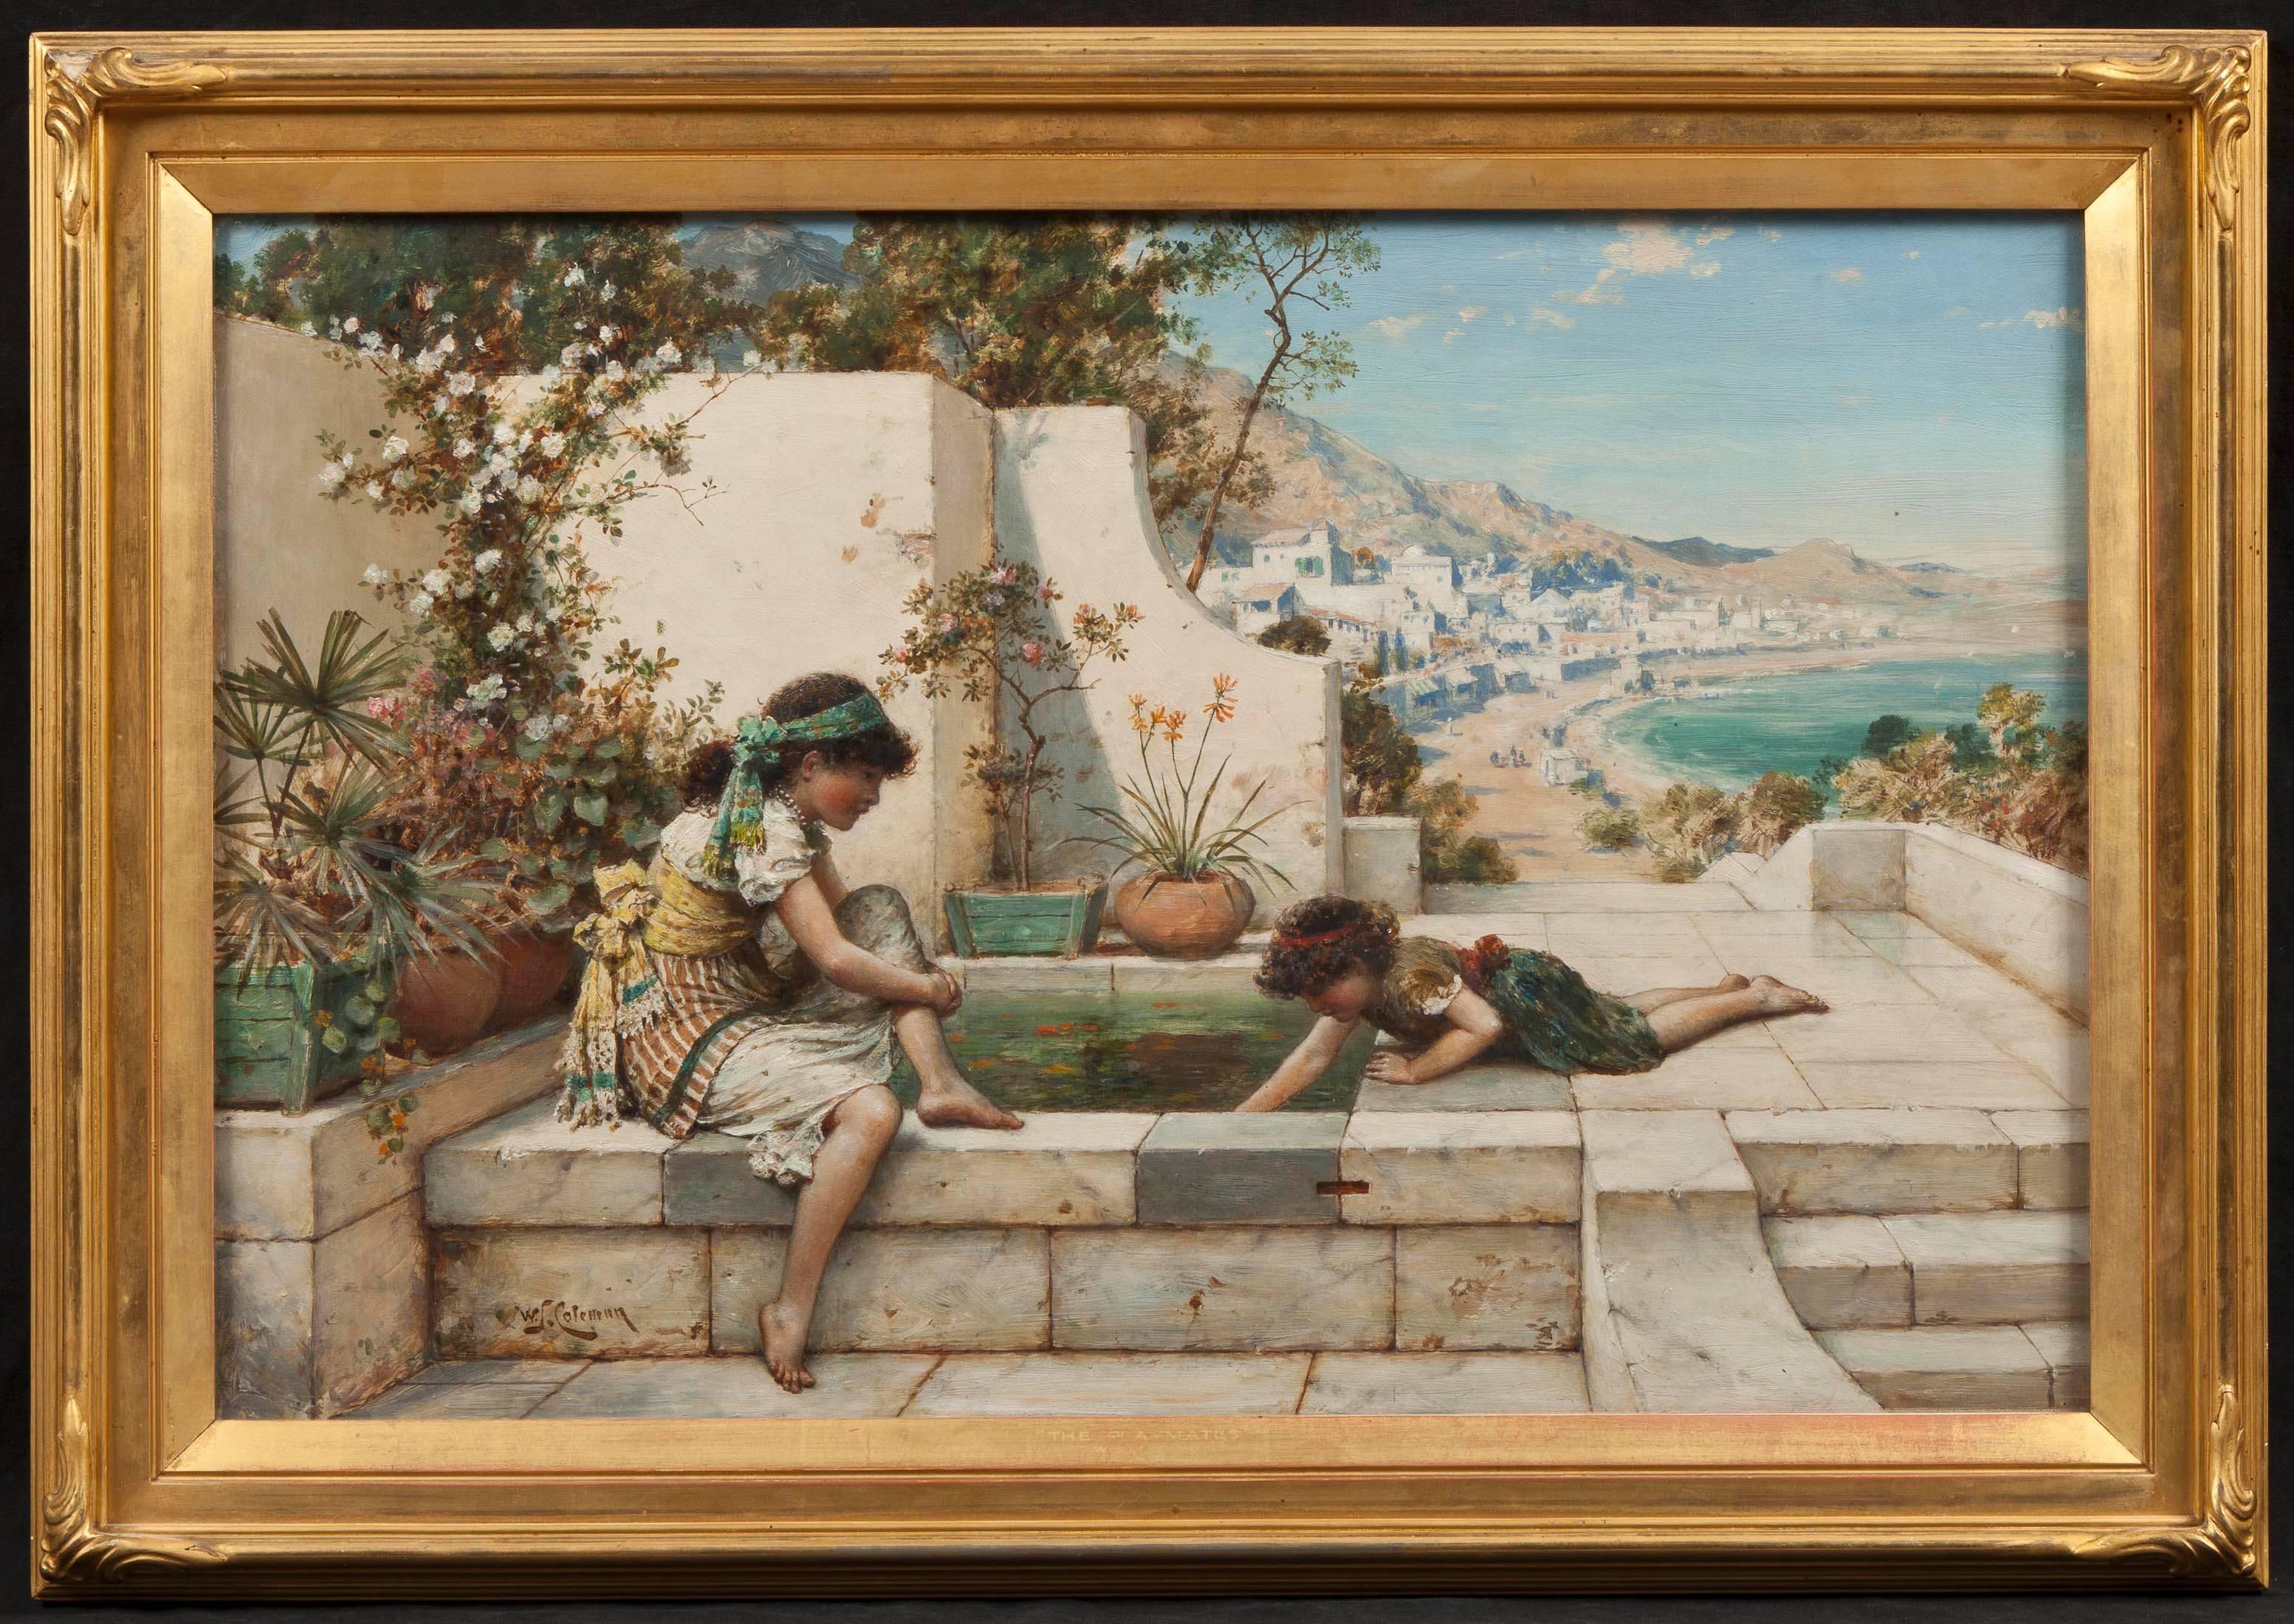 ‘Summer Reflections’ Painting by William Stephen Coleman 

Depicts two young girls sitting and playing in the water of a lily pond in a garden at a villa, against a landscape background of a coastal city. Possibly located on the Mediterranean